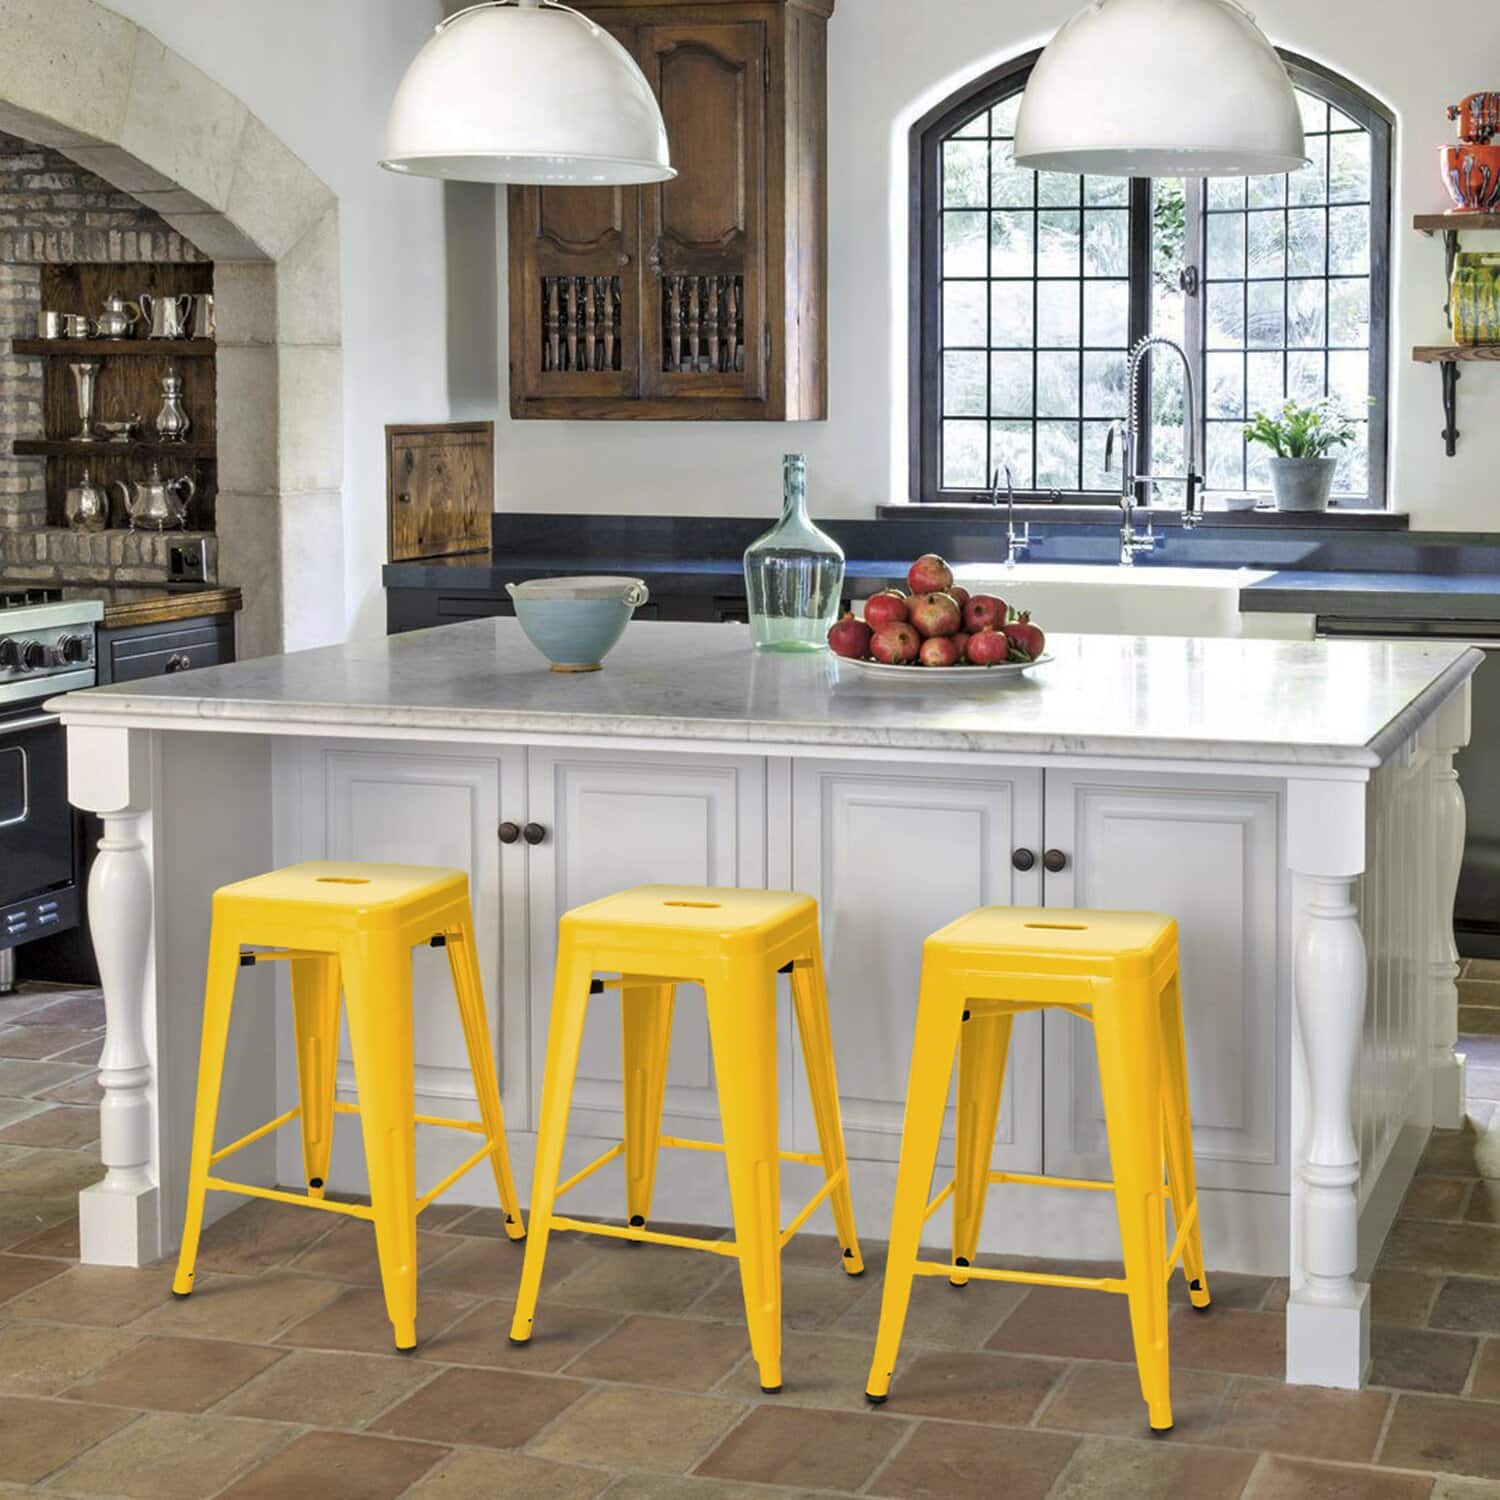 Add some Colour to your Space with these Yellow Kitchen Island Bar Stools